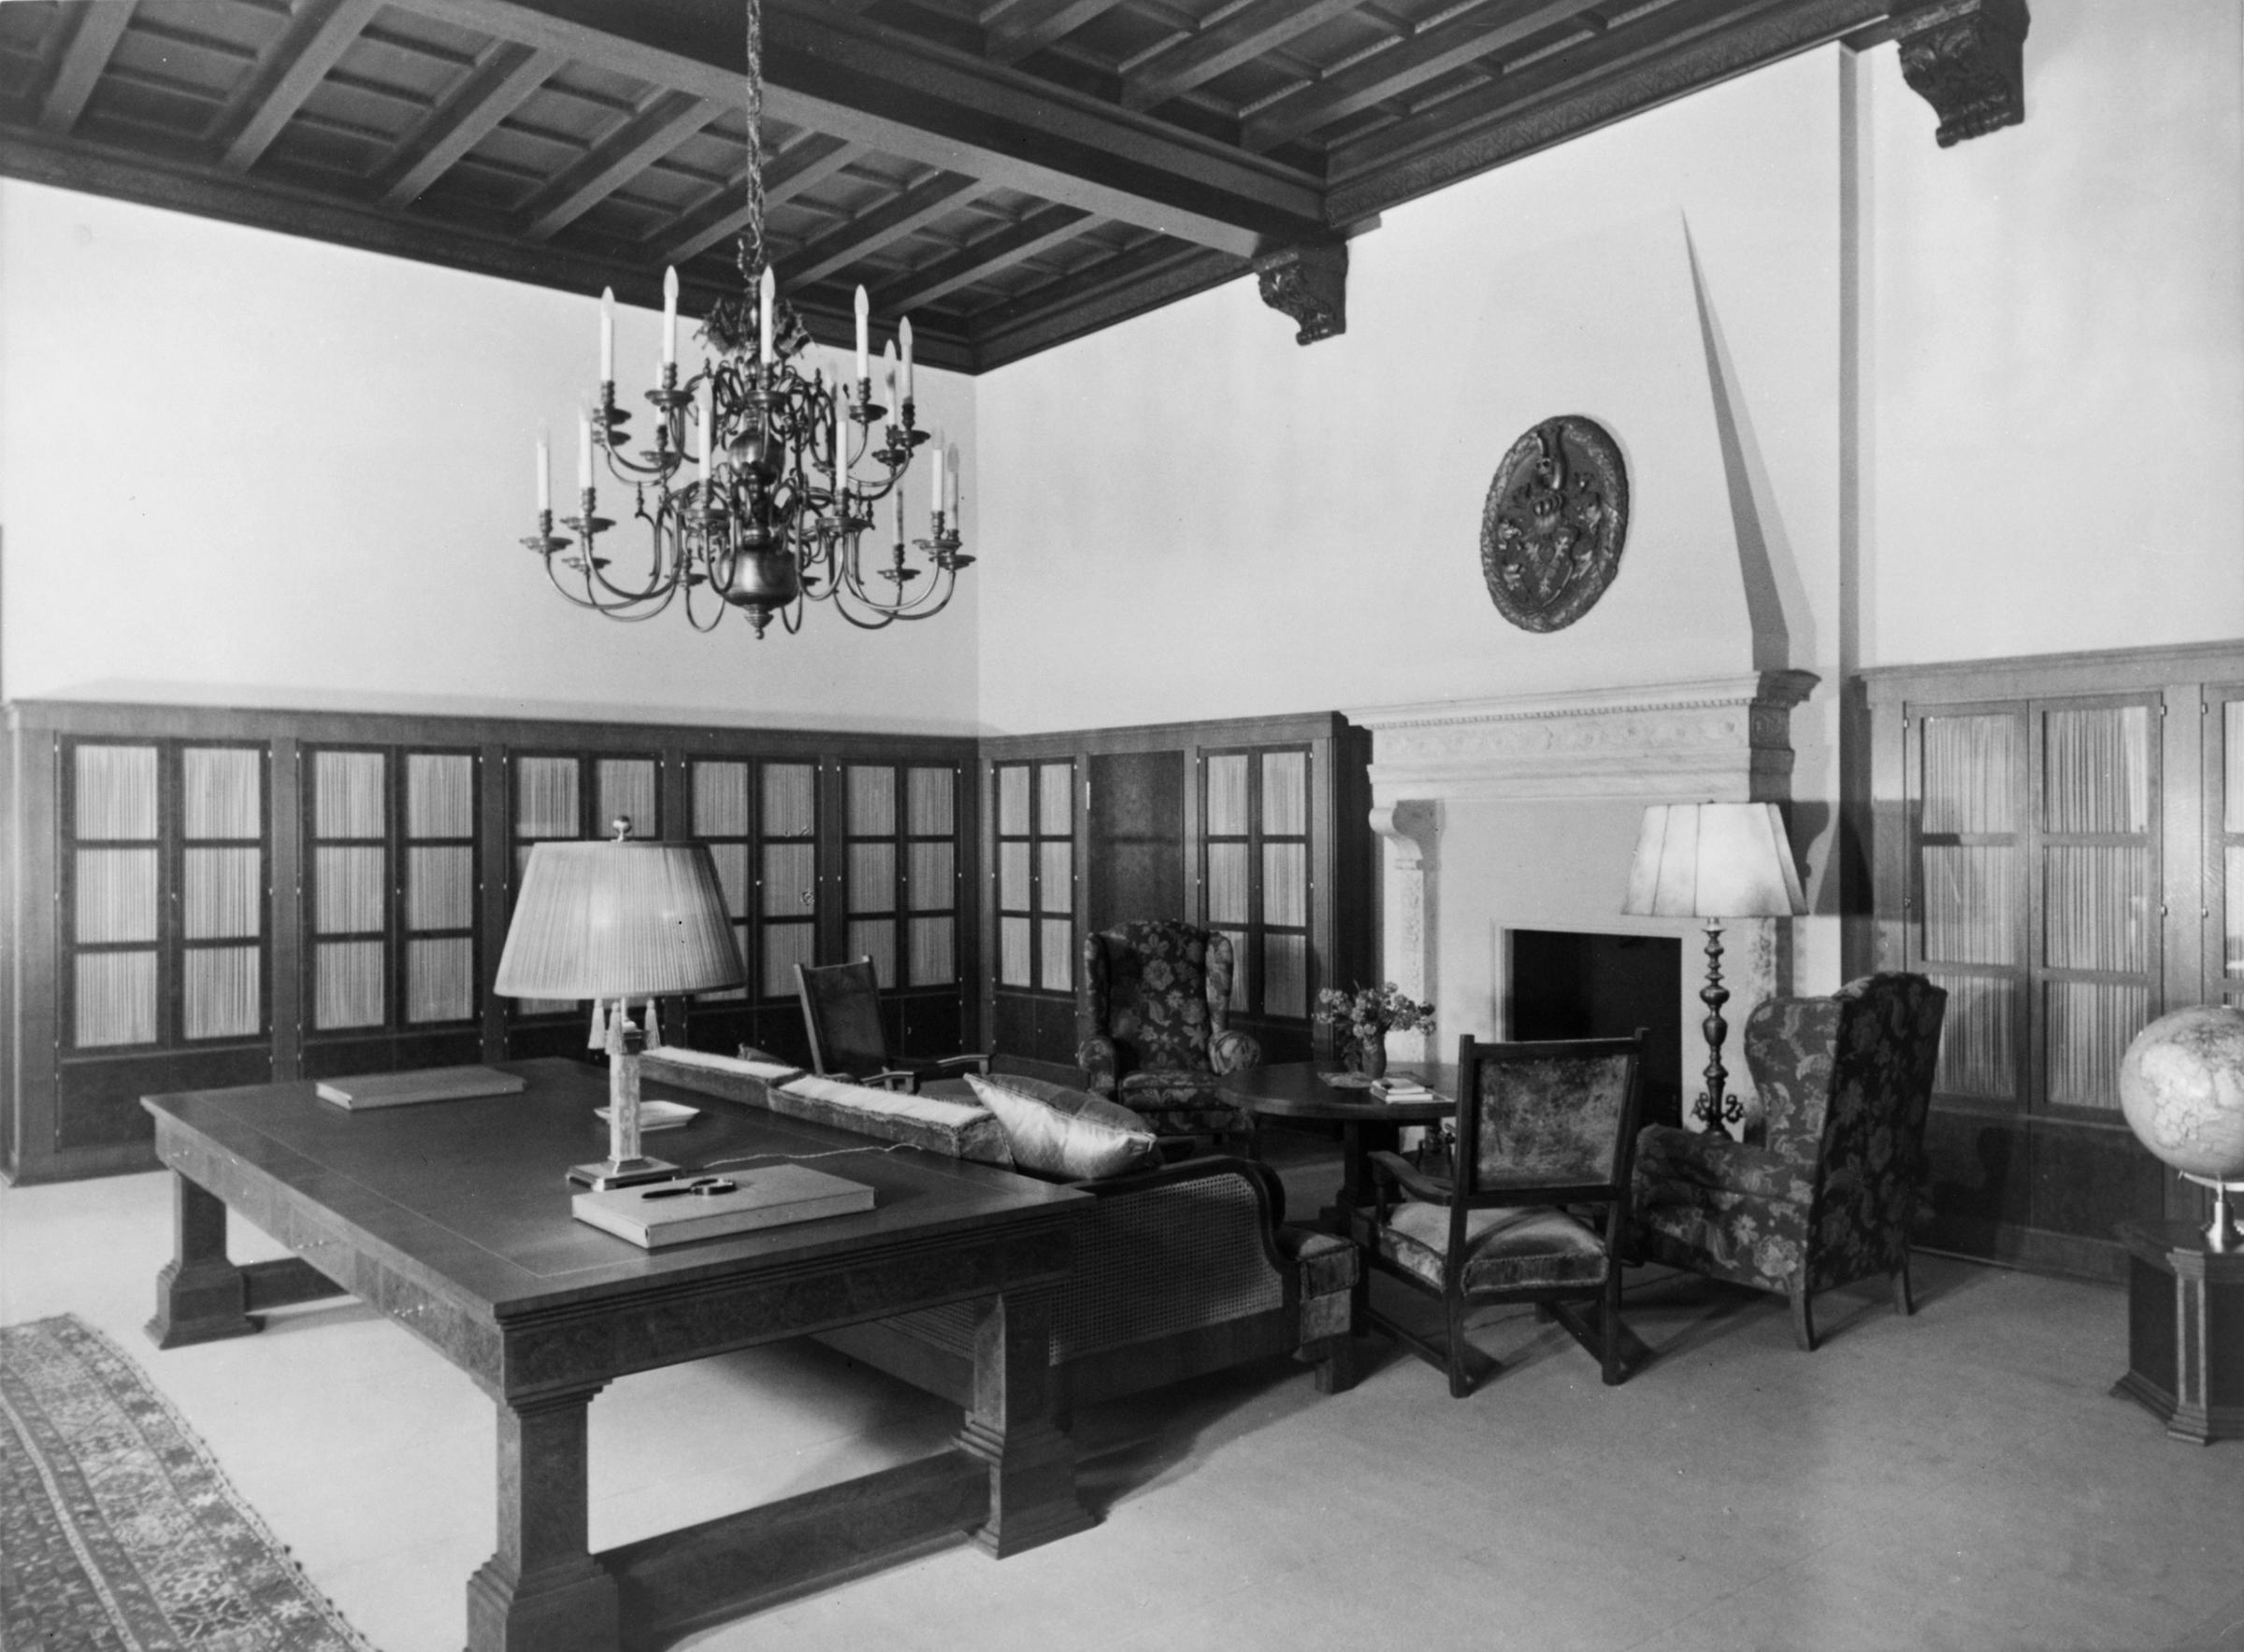 Heinrich Hoffmann, photography of Hitler’s private library on the second floor of the Old Chancellery in Berlin after the 1934 renovation by the Atelier Troost